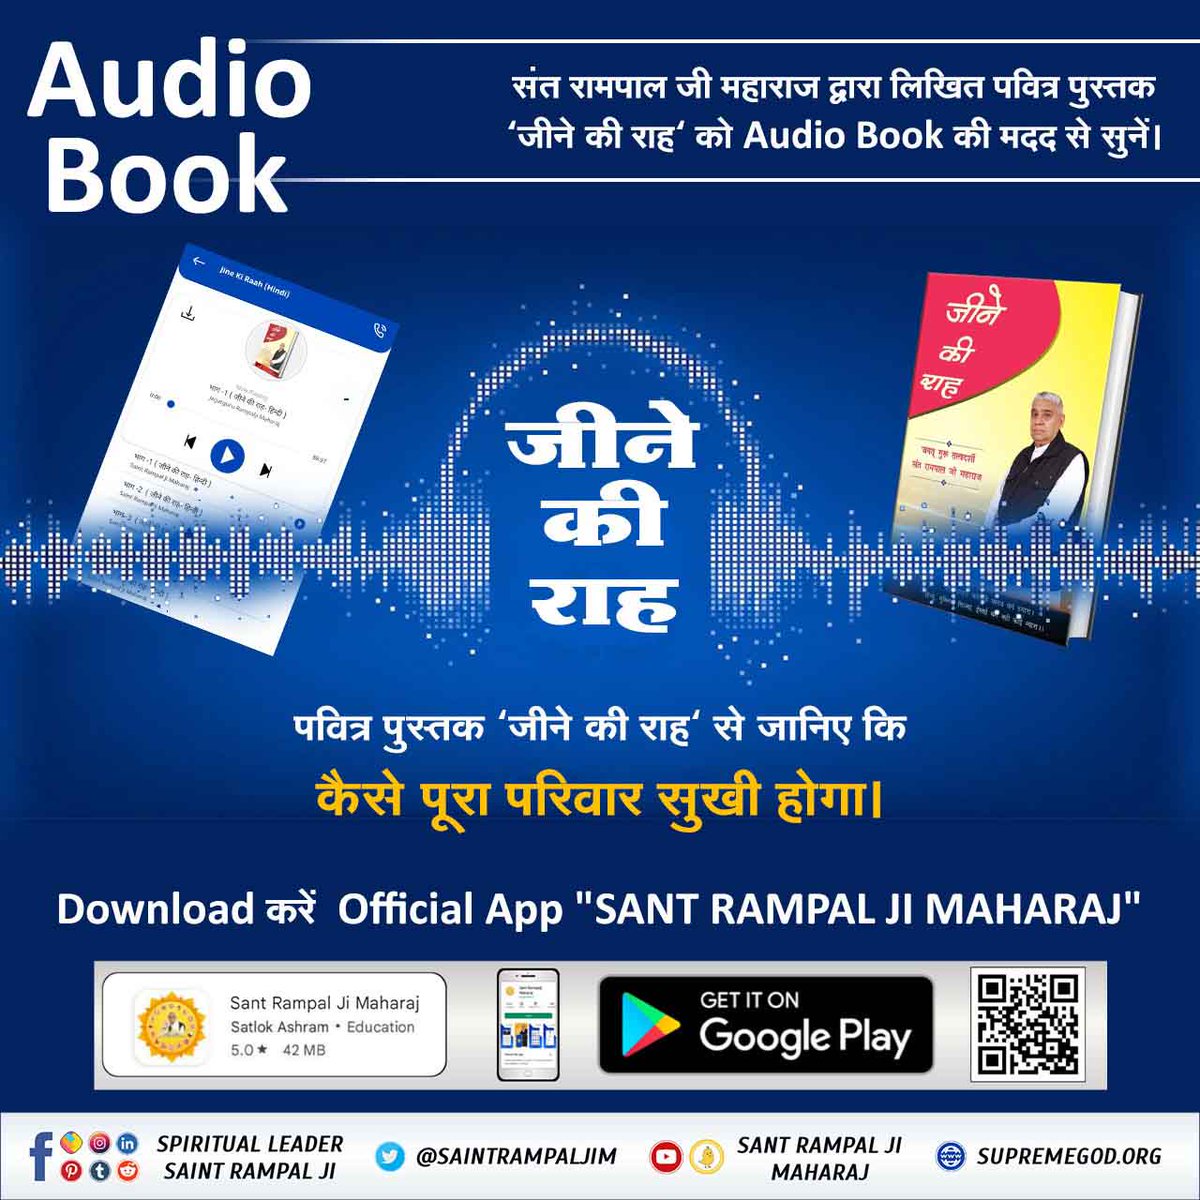 #AudioBook_JeeneKiRah Know from the holy book 'Jeene Ki Raah' how the whole family can be happy. Download Official App 'SANT RAMPAL JI MAHARAJ' to Listen to the Audiobook Daily Watch Sadhna TV from 7'30pm